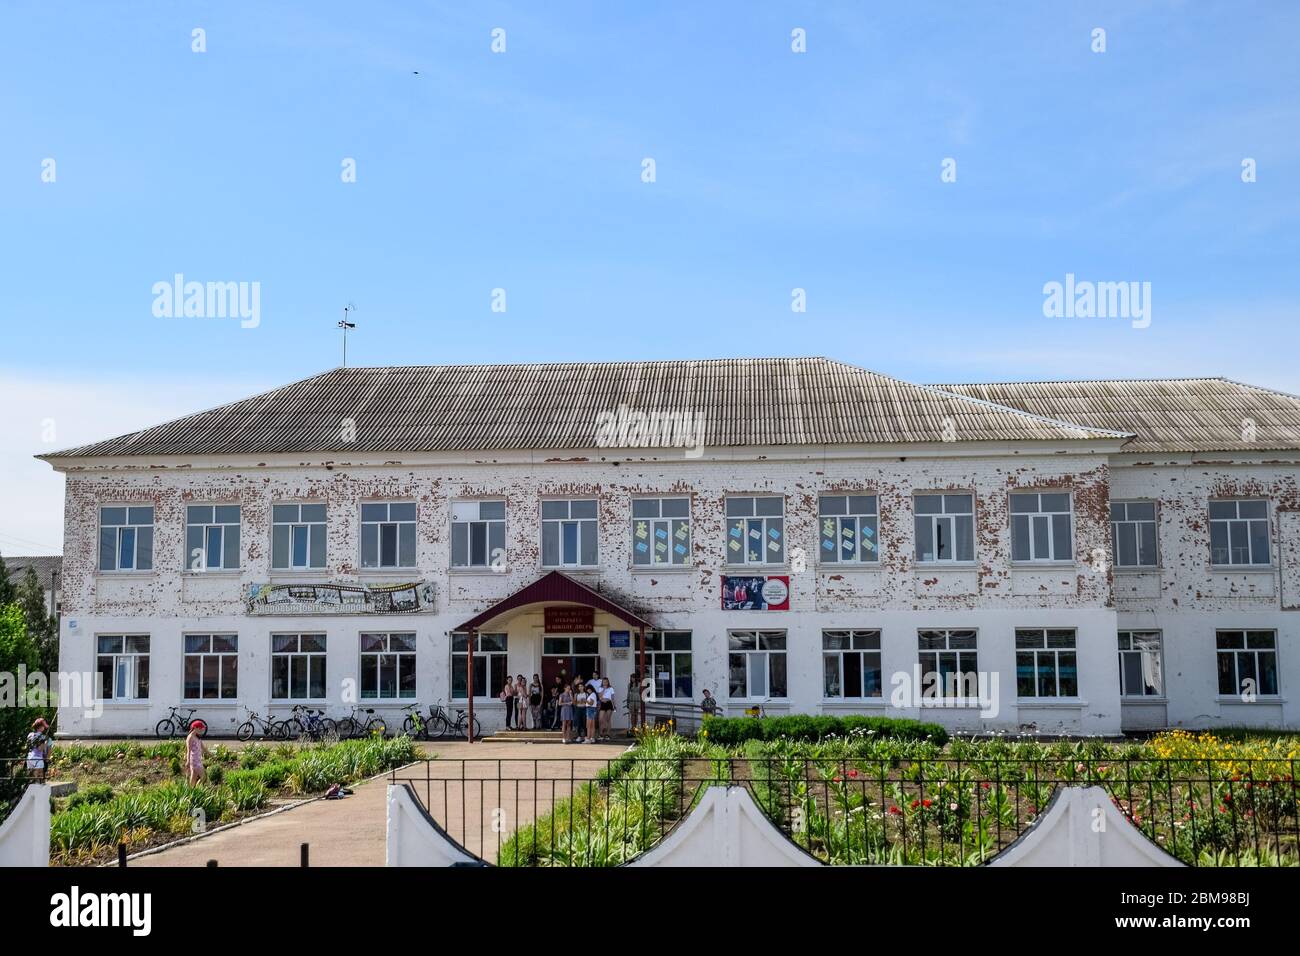 Stavropol, Russia - June 13, 2019: Administration building for public use. Stock Photo